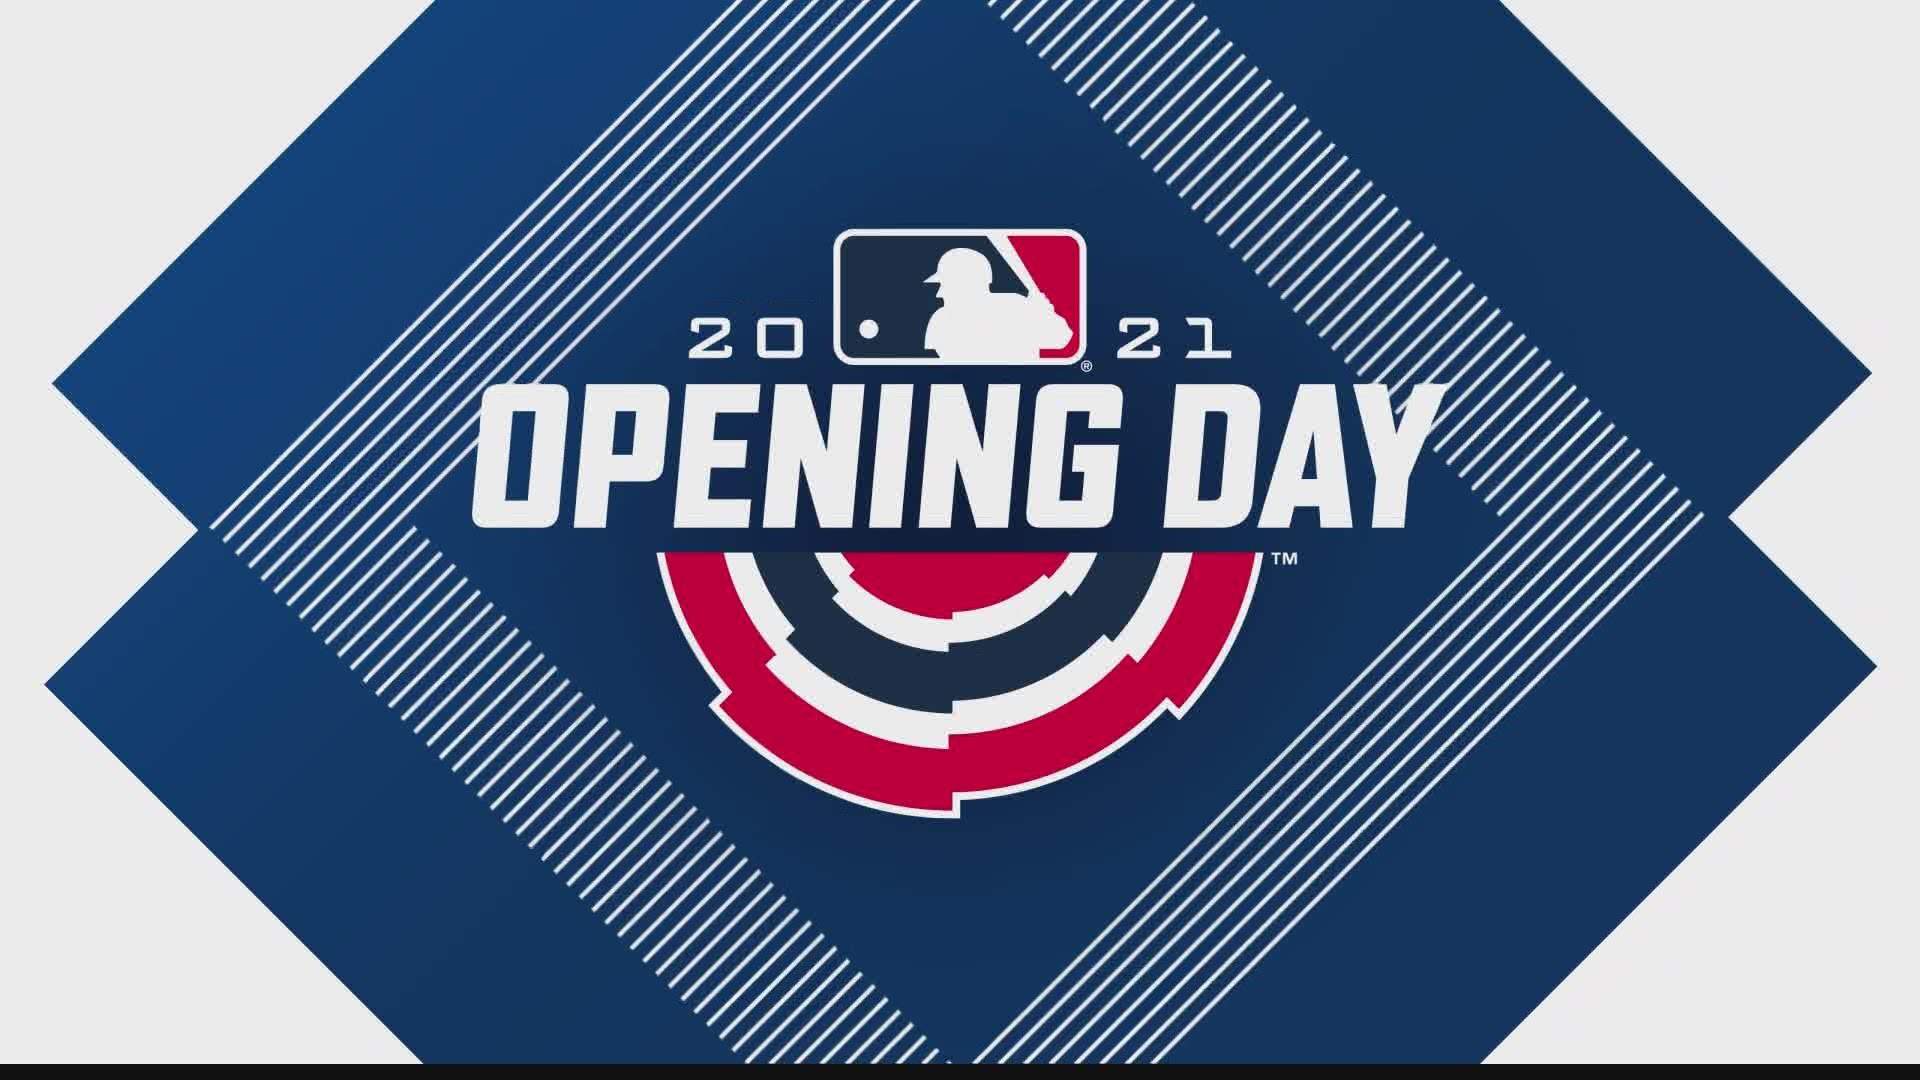 MLB opening day 2021 brings hope as normalcy slowly returns